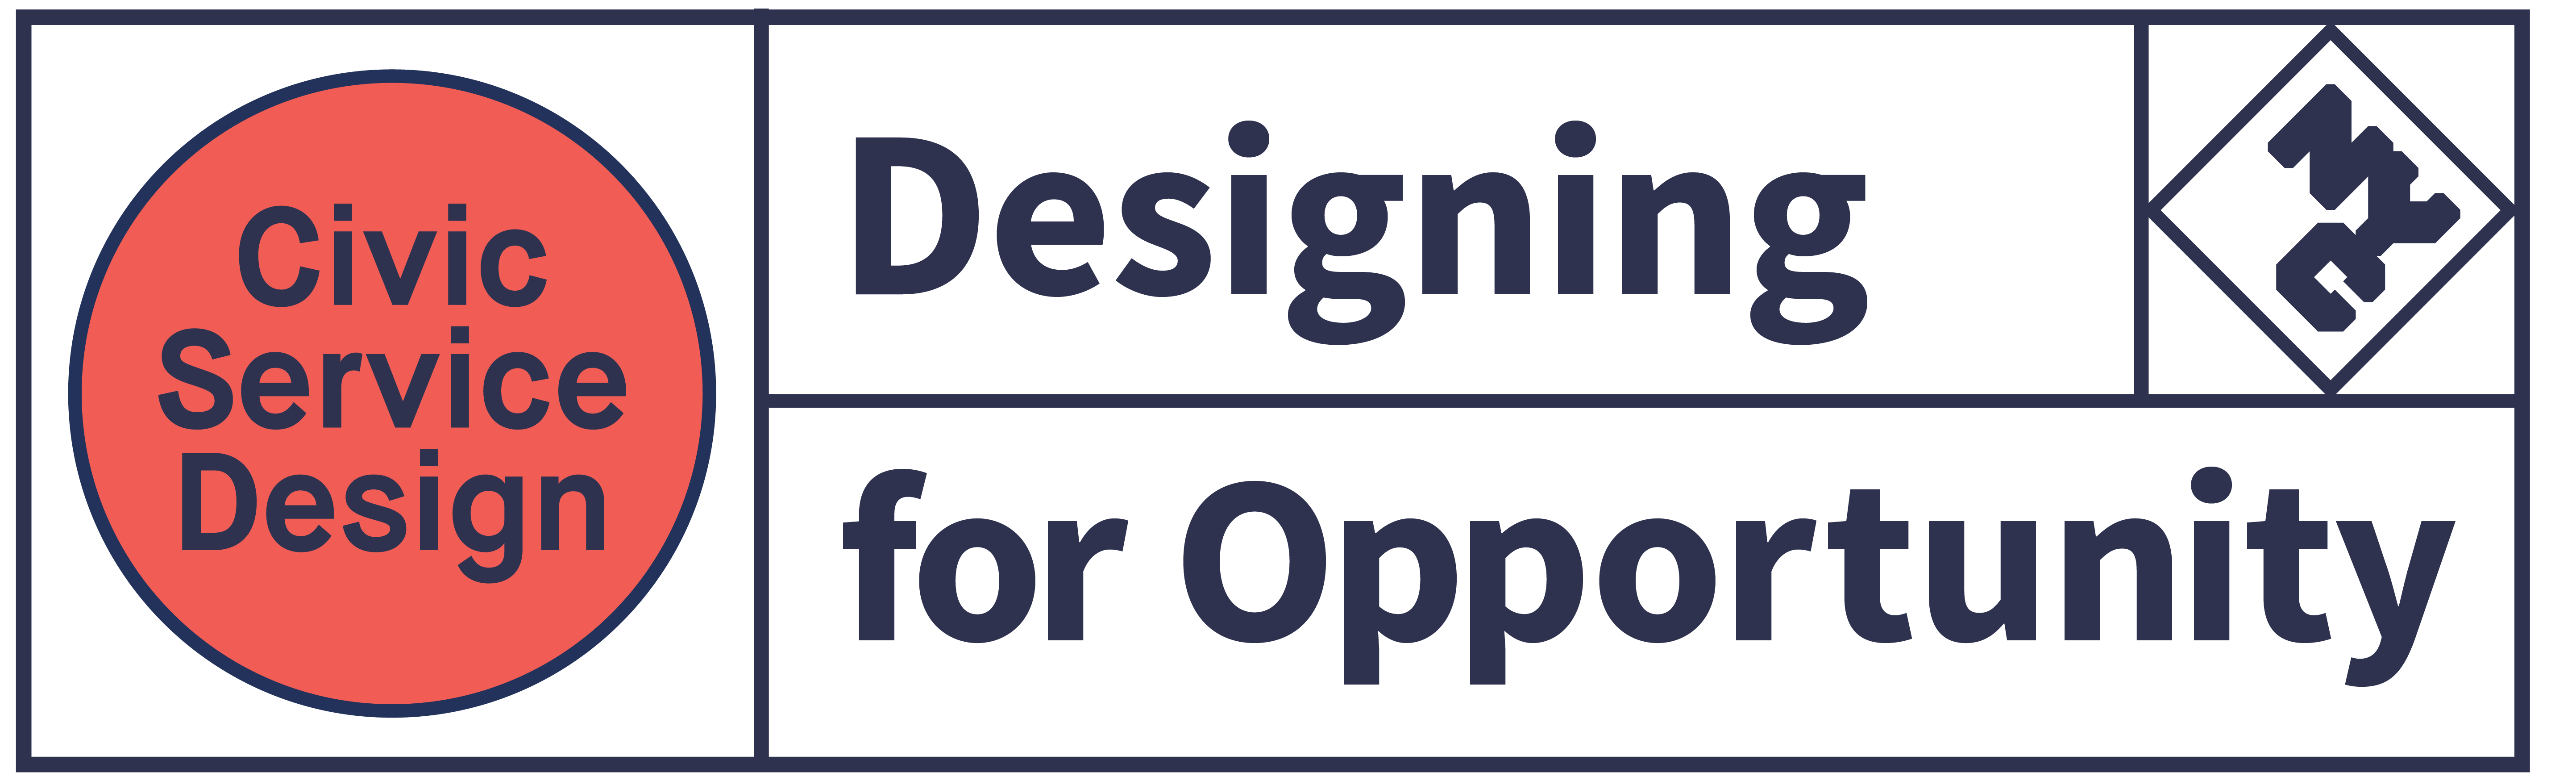 Designing for Opportunity